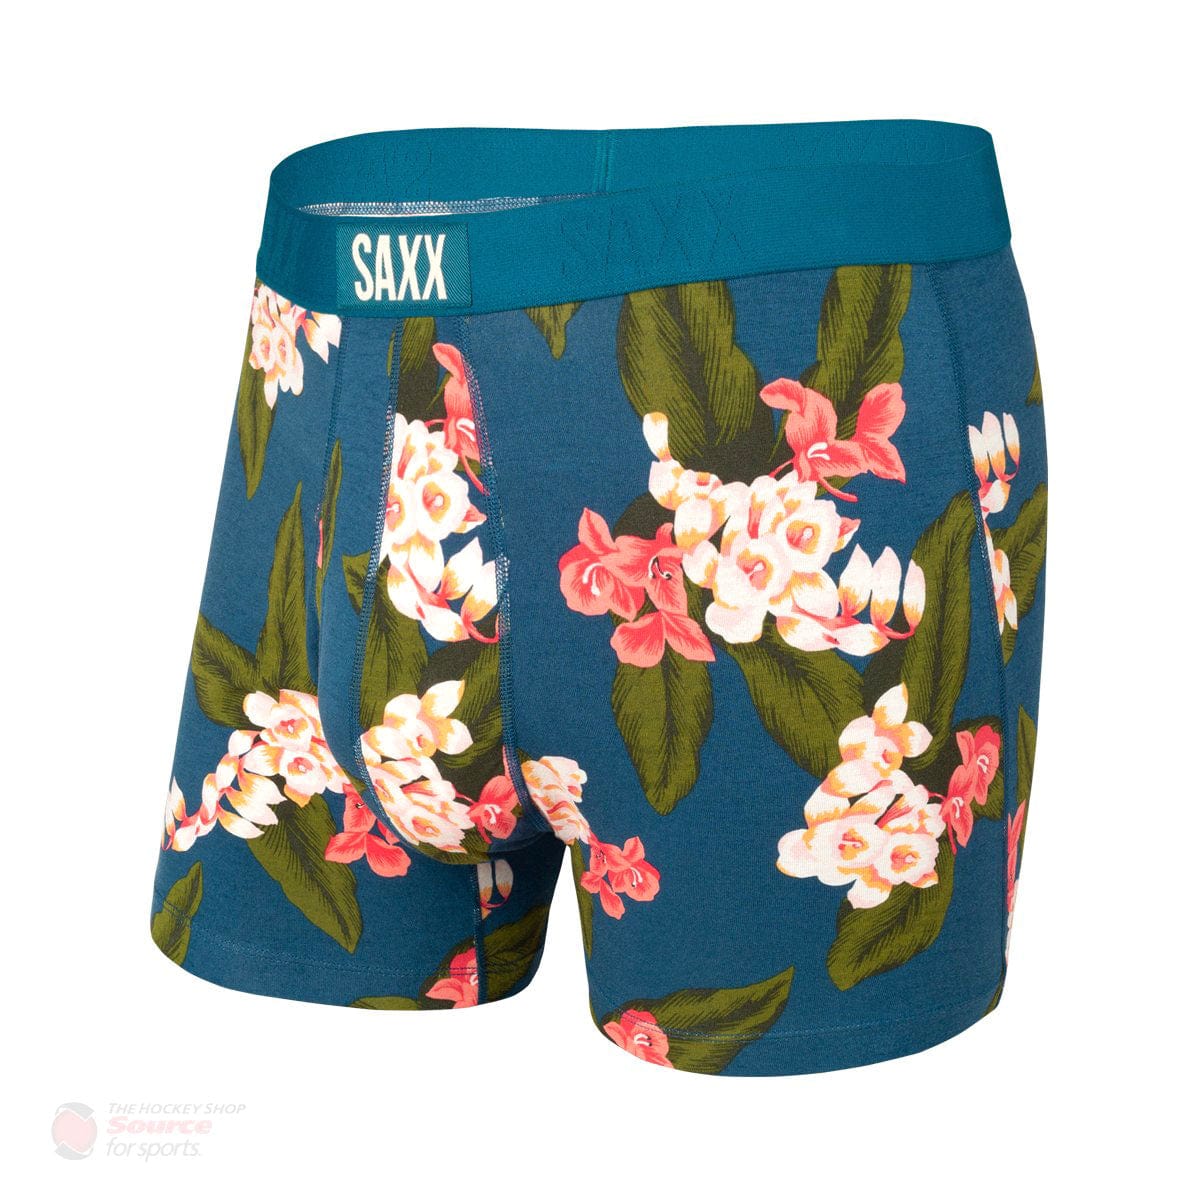 Saxx Ultra Boxers - Teal Orchid